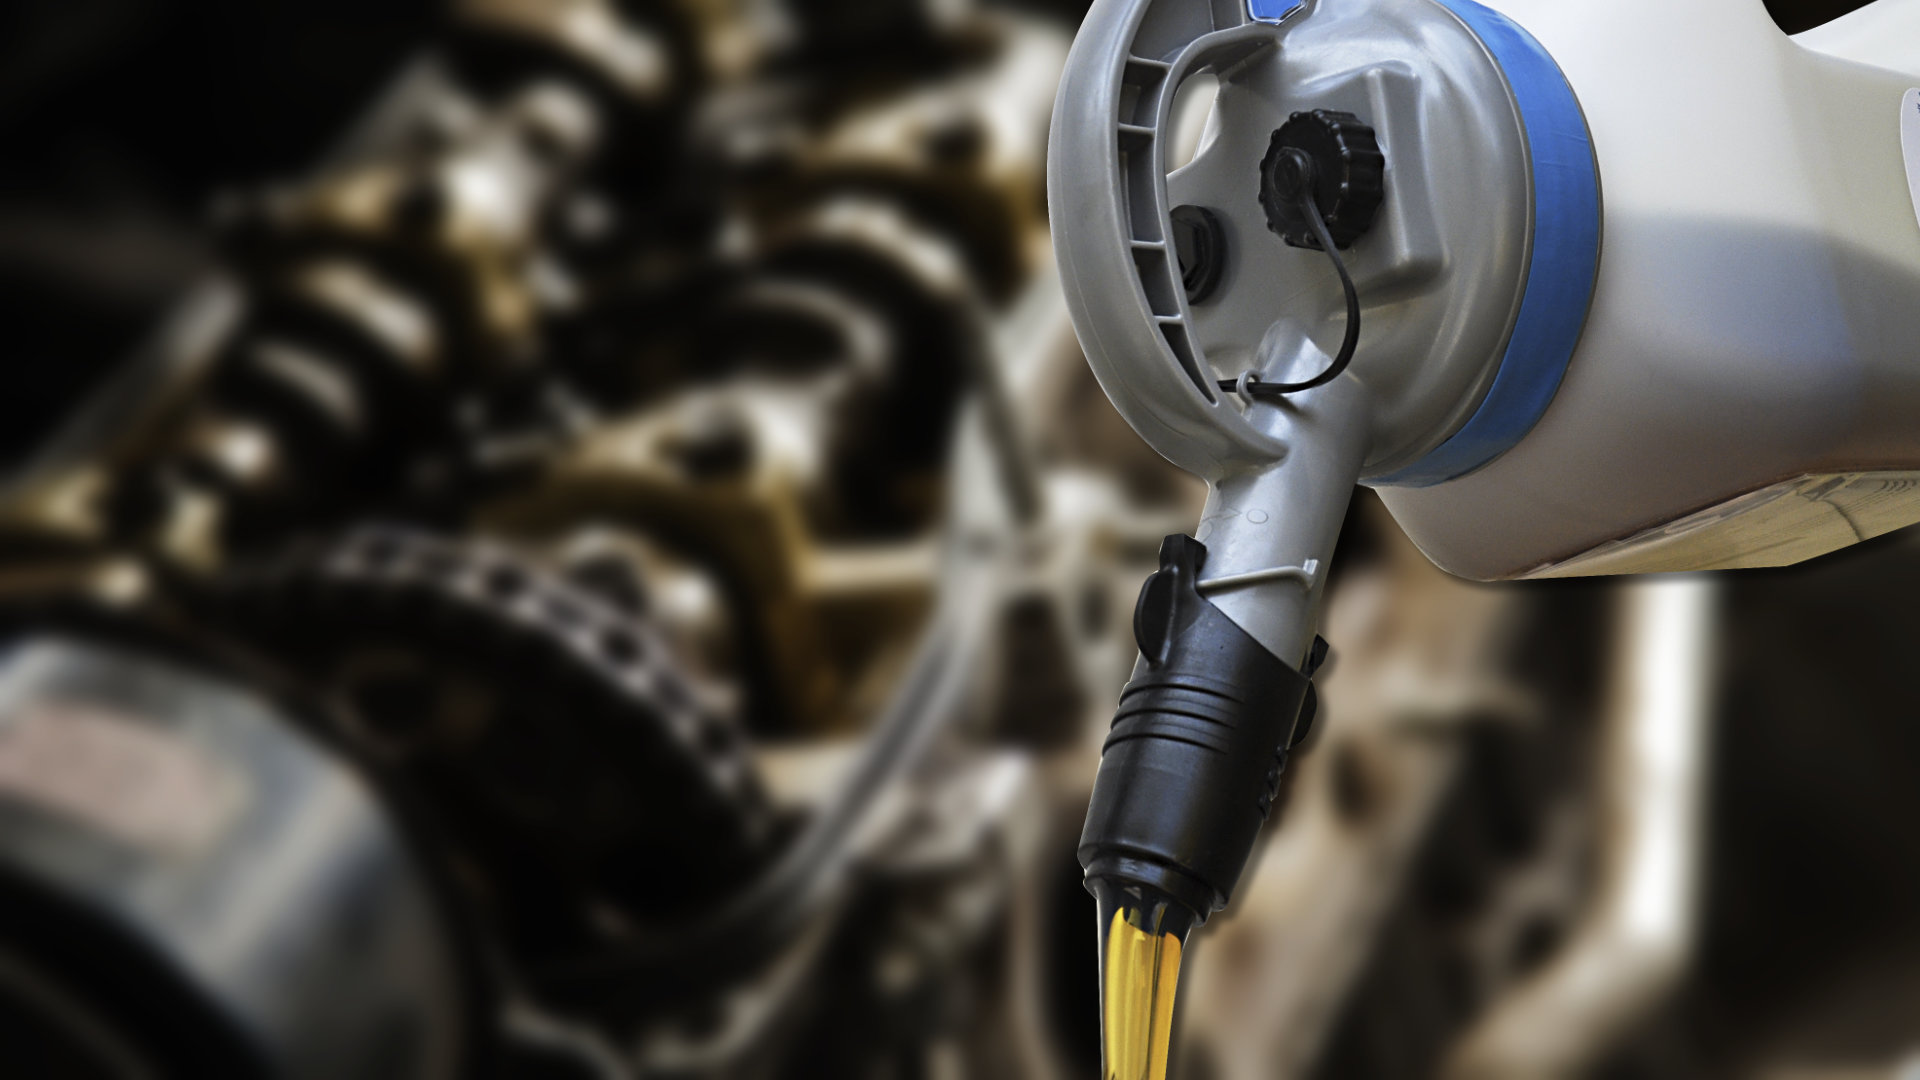 One of the most important uses of lubricants is that used in internal combustion engines